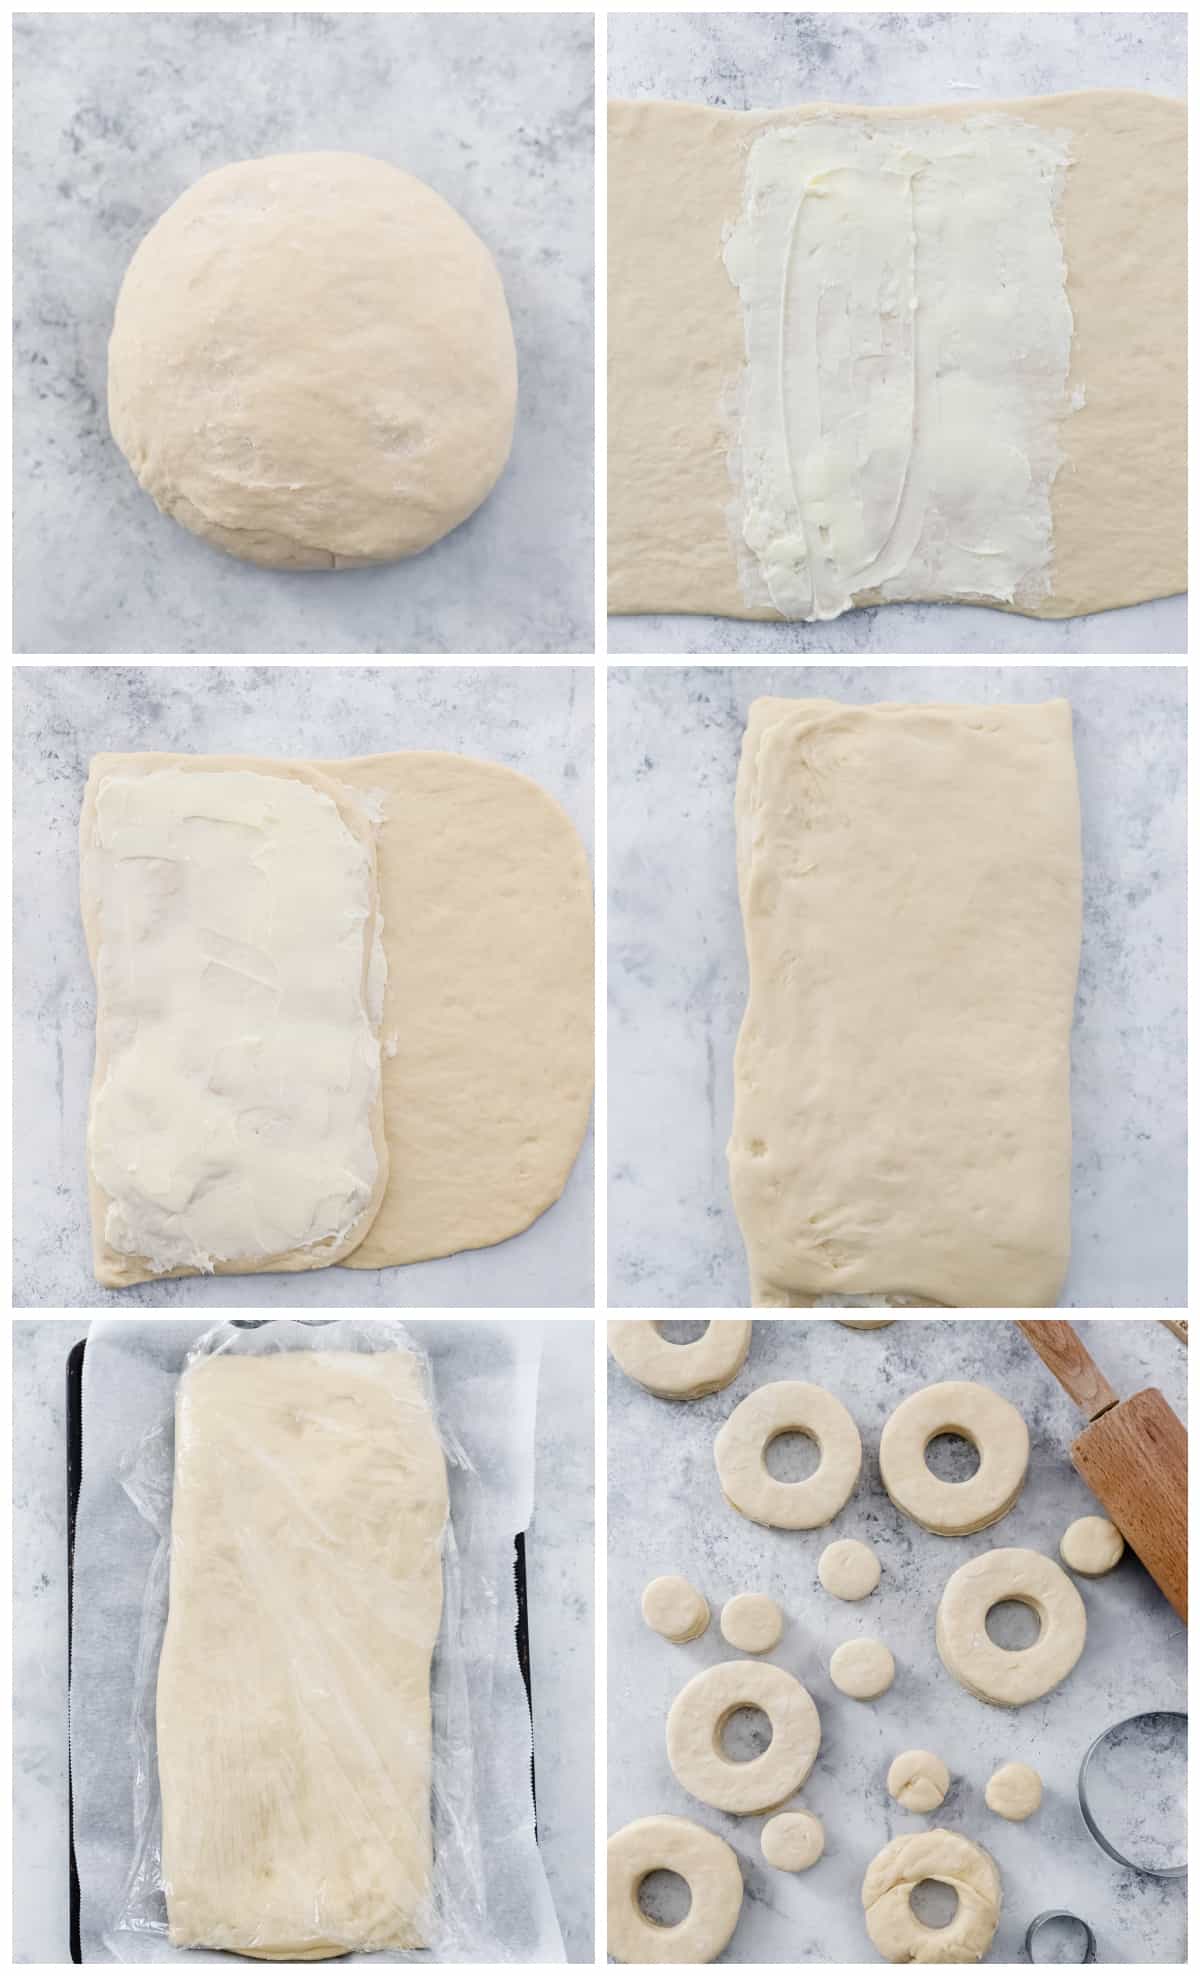 step by step photos for how to make cronuts.